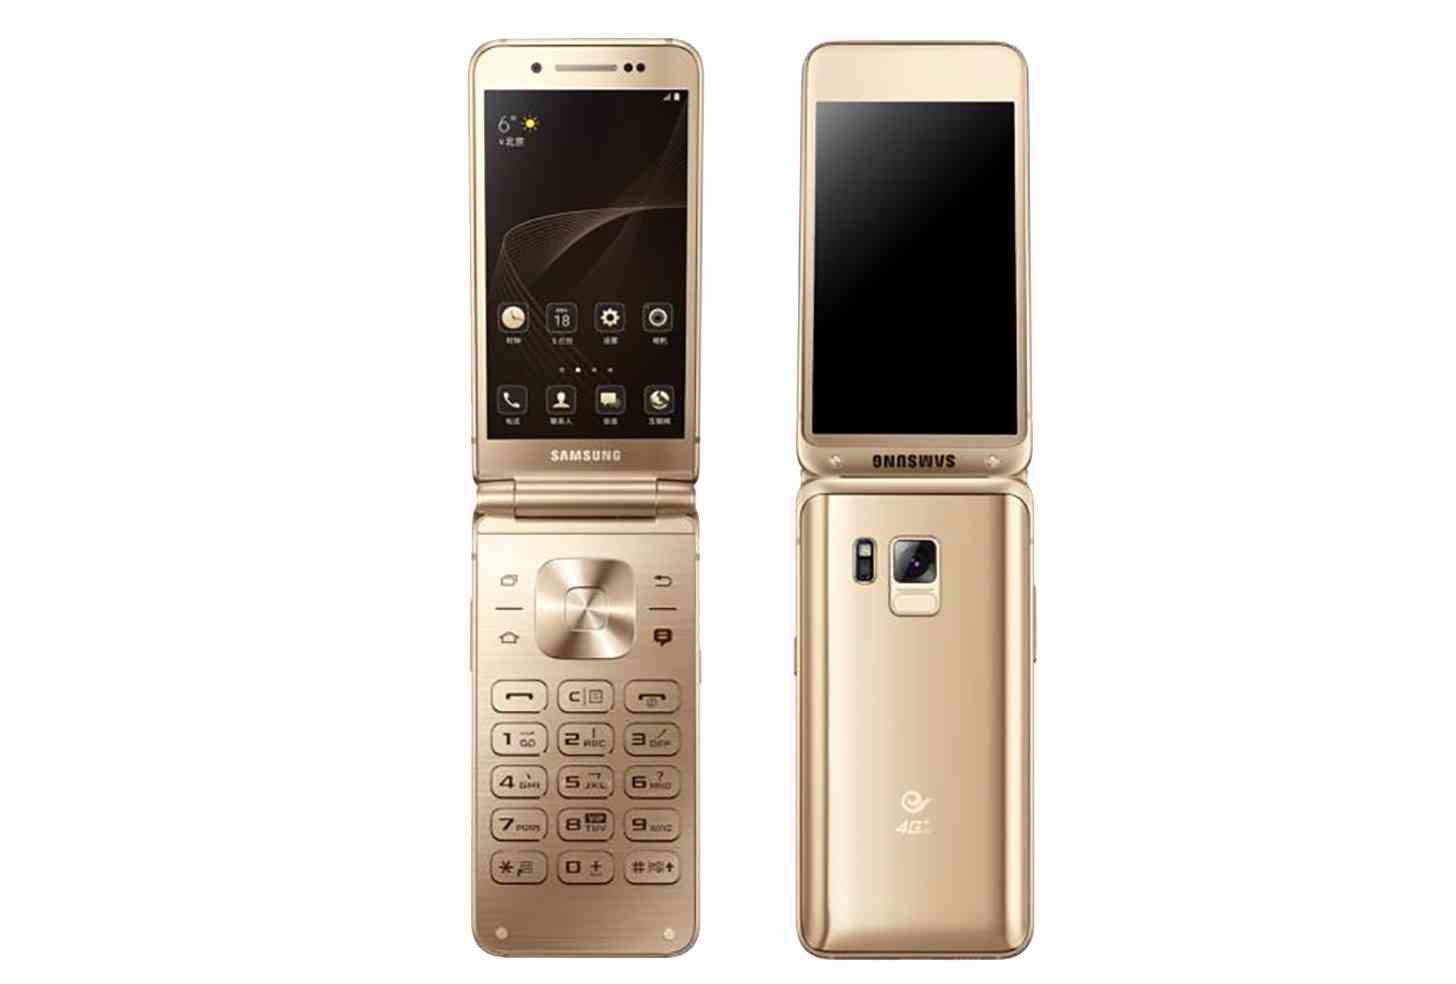 Samsung W2017 Android flip phone gold